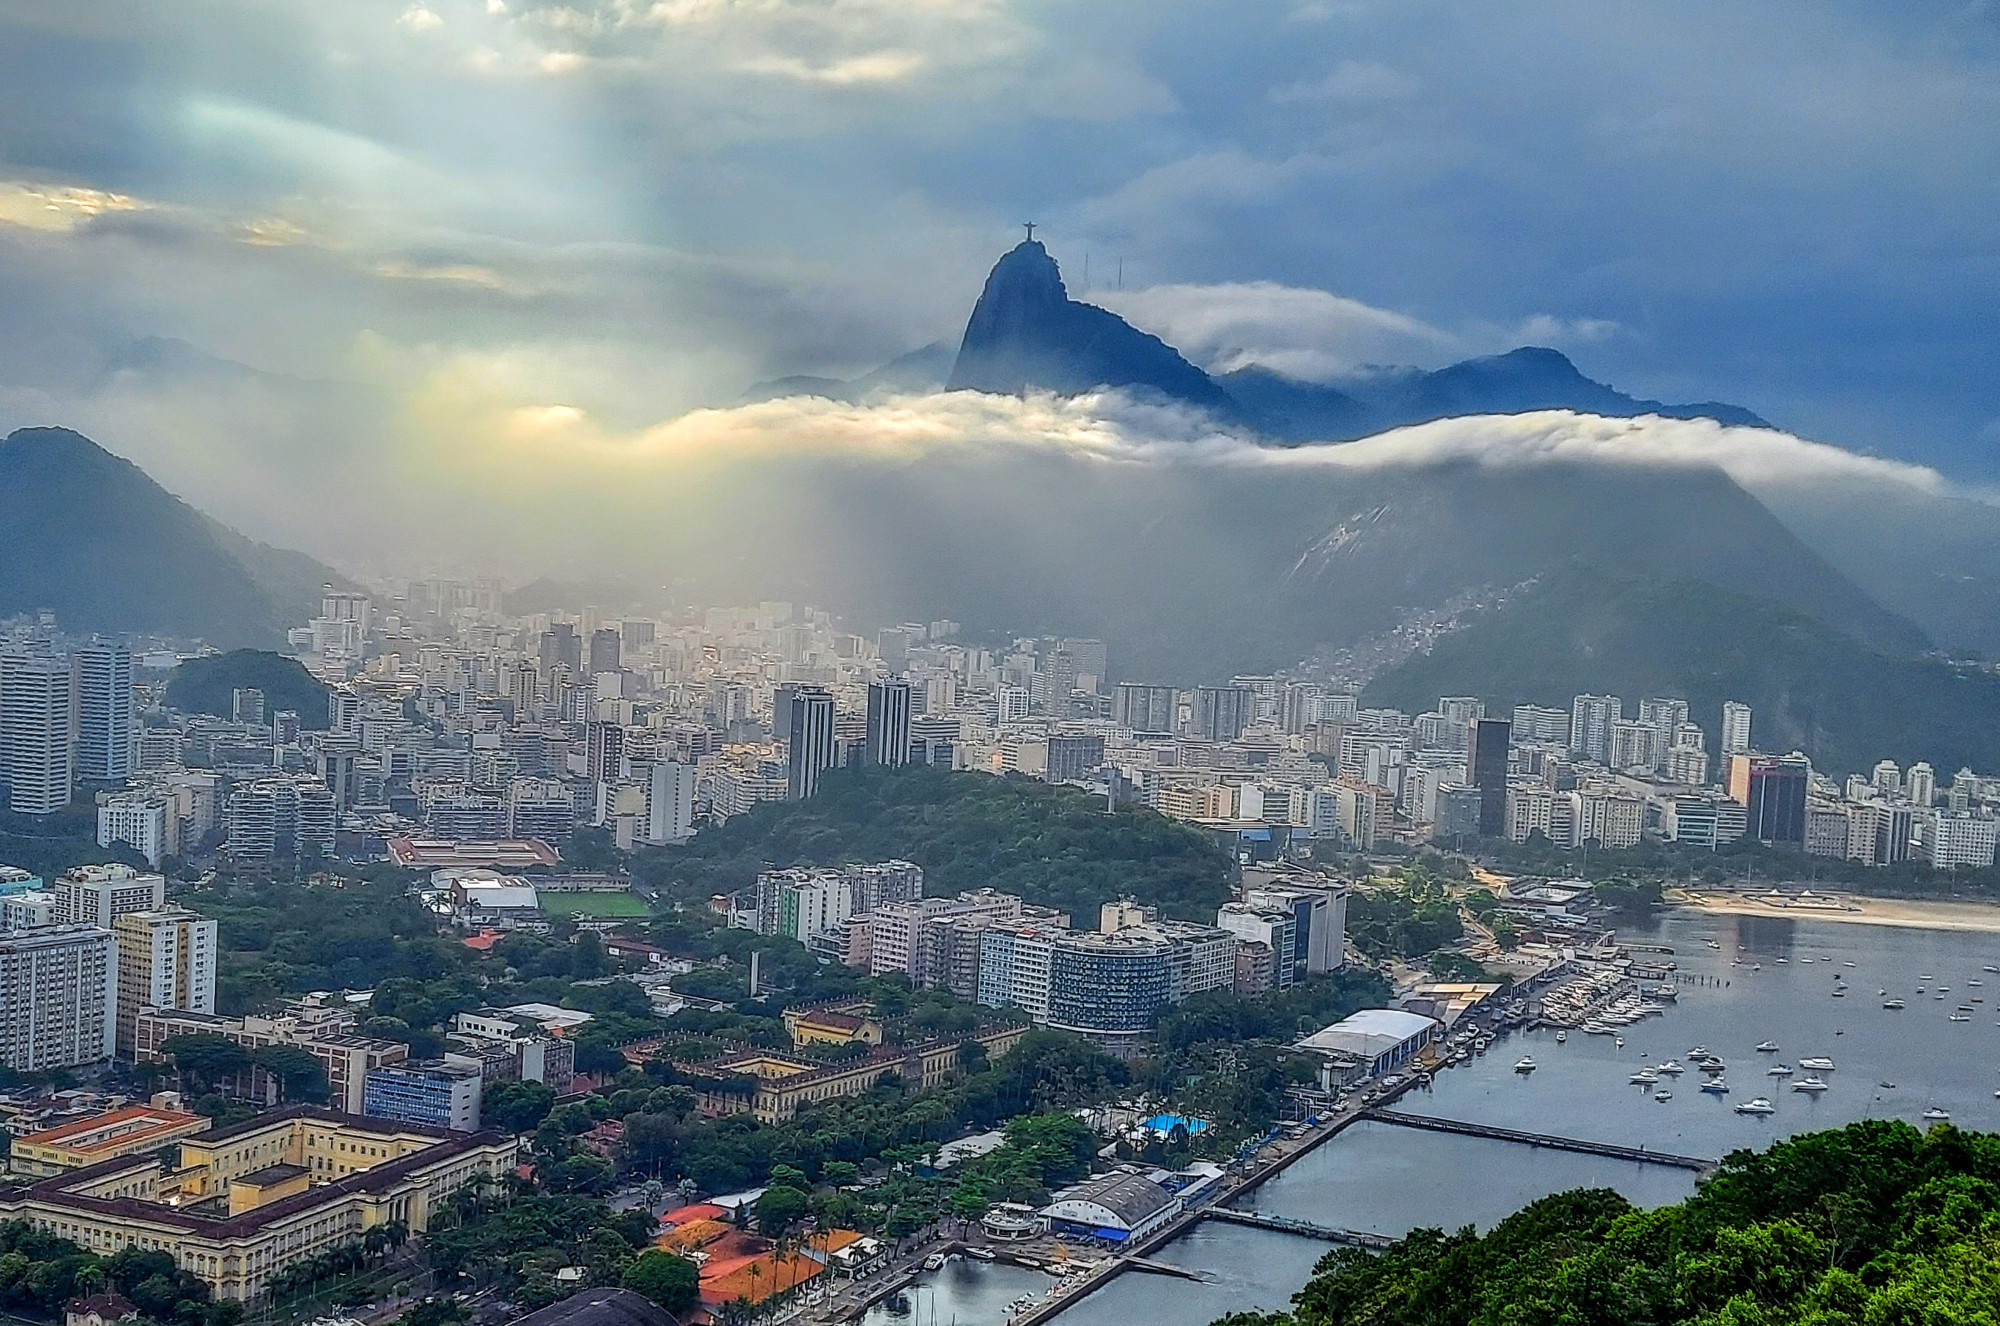 The Christ the Redeemer statue on top of dramatic Corcovado mountain shrouded by clouds, whose beams of light shine onto the vibrant city scape of Rio de Janeiro, Brazil.